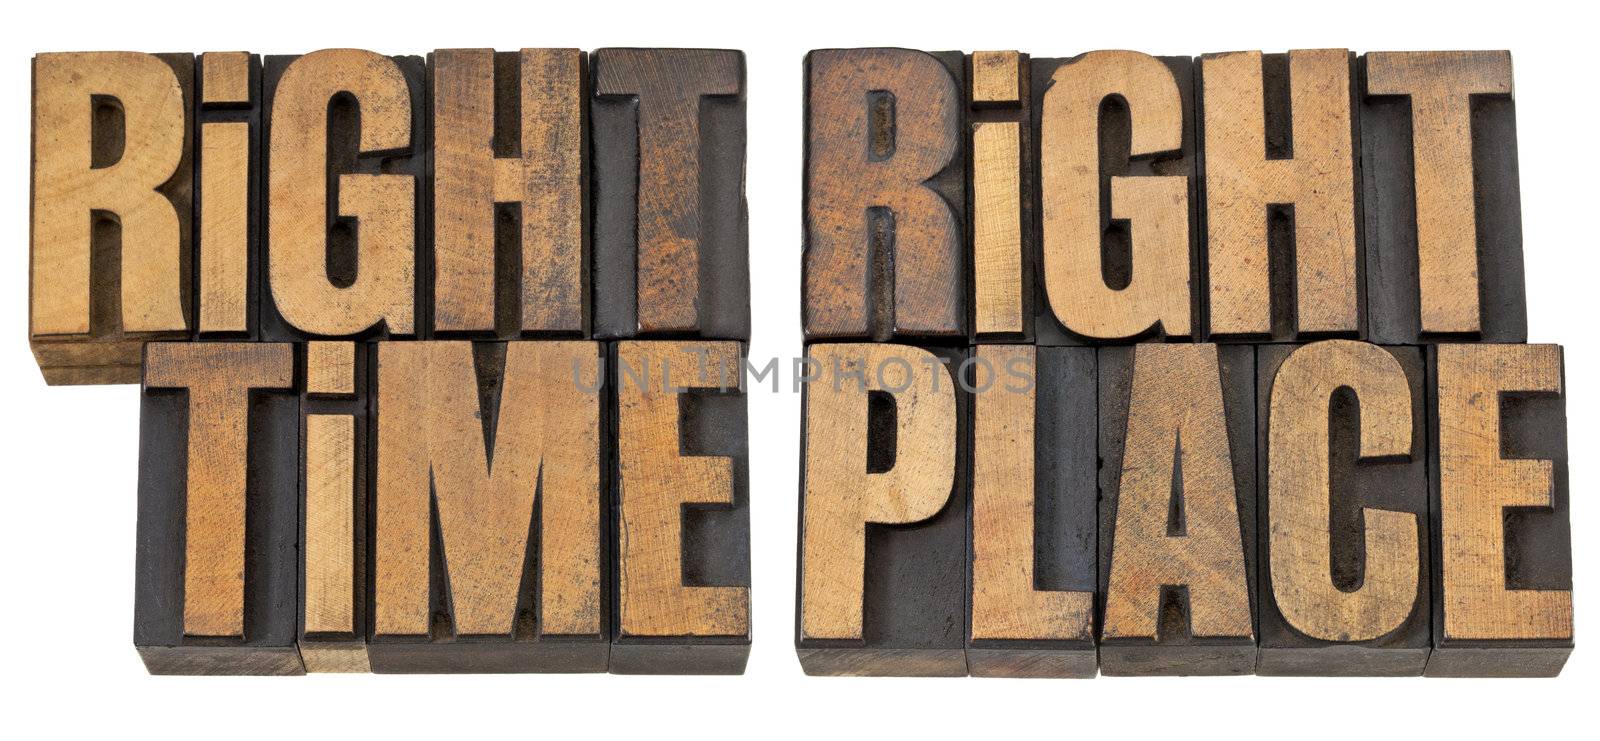 right time, right place - opportunity concept  - isolated phrase in vintage letterpress wood type